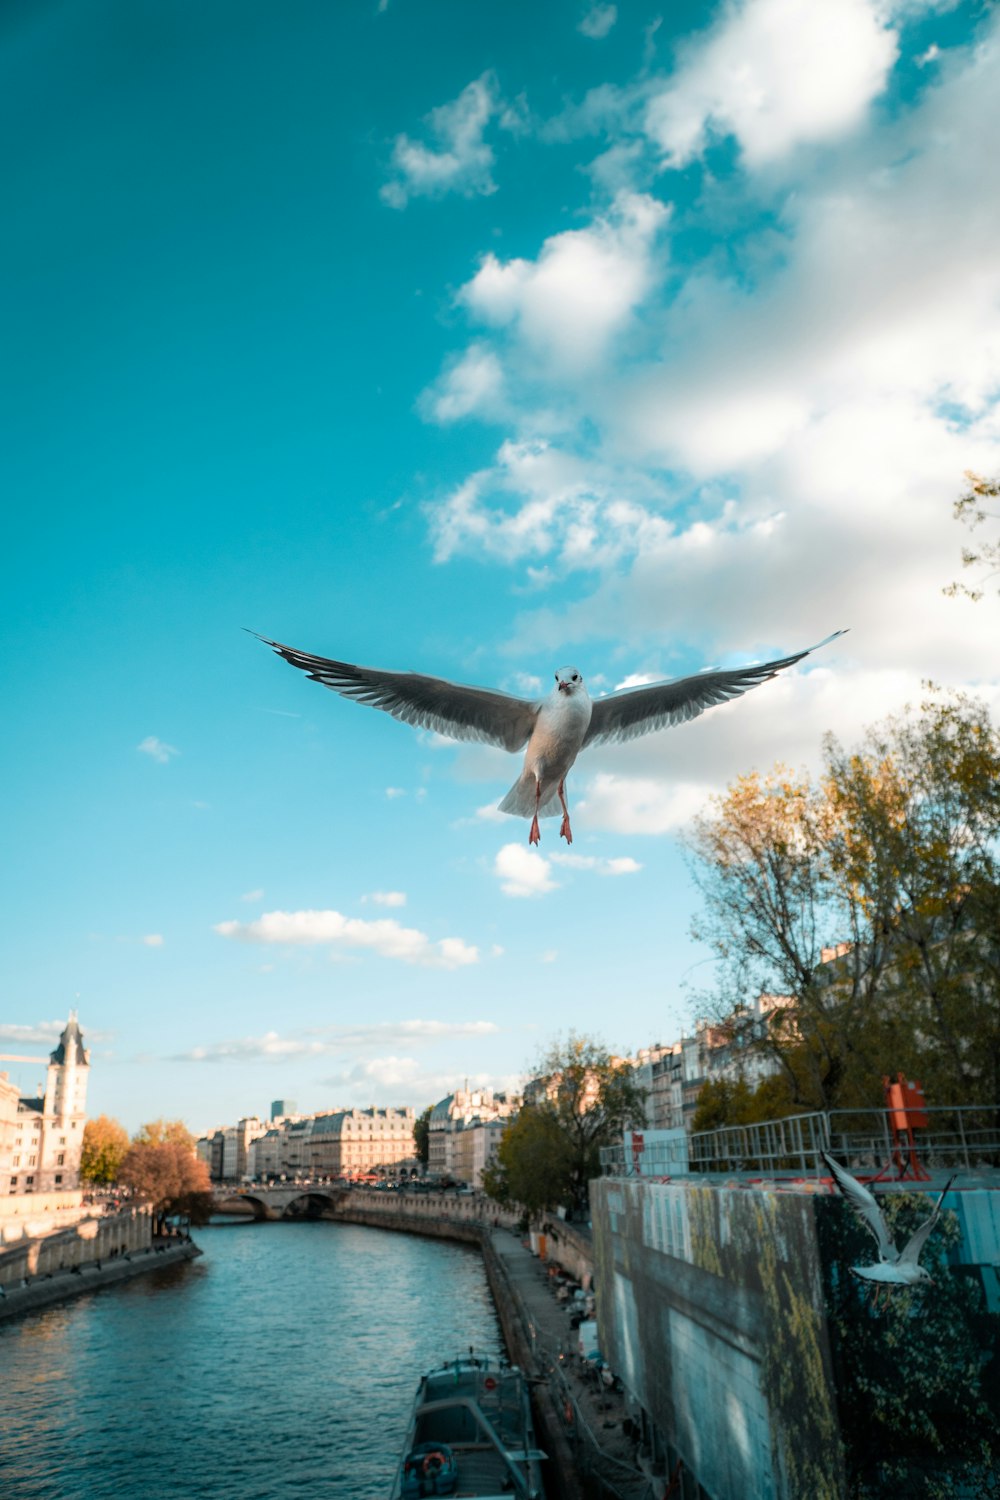 a seagull flying over a river in a city